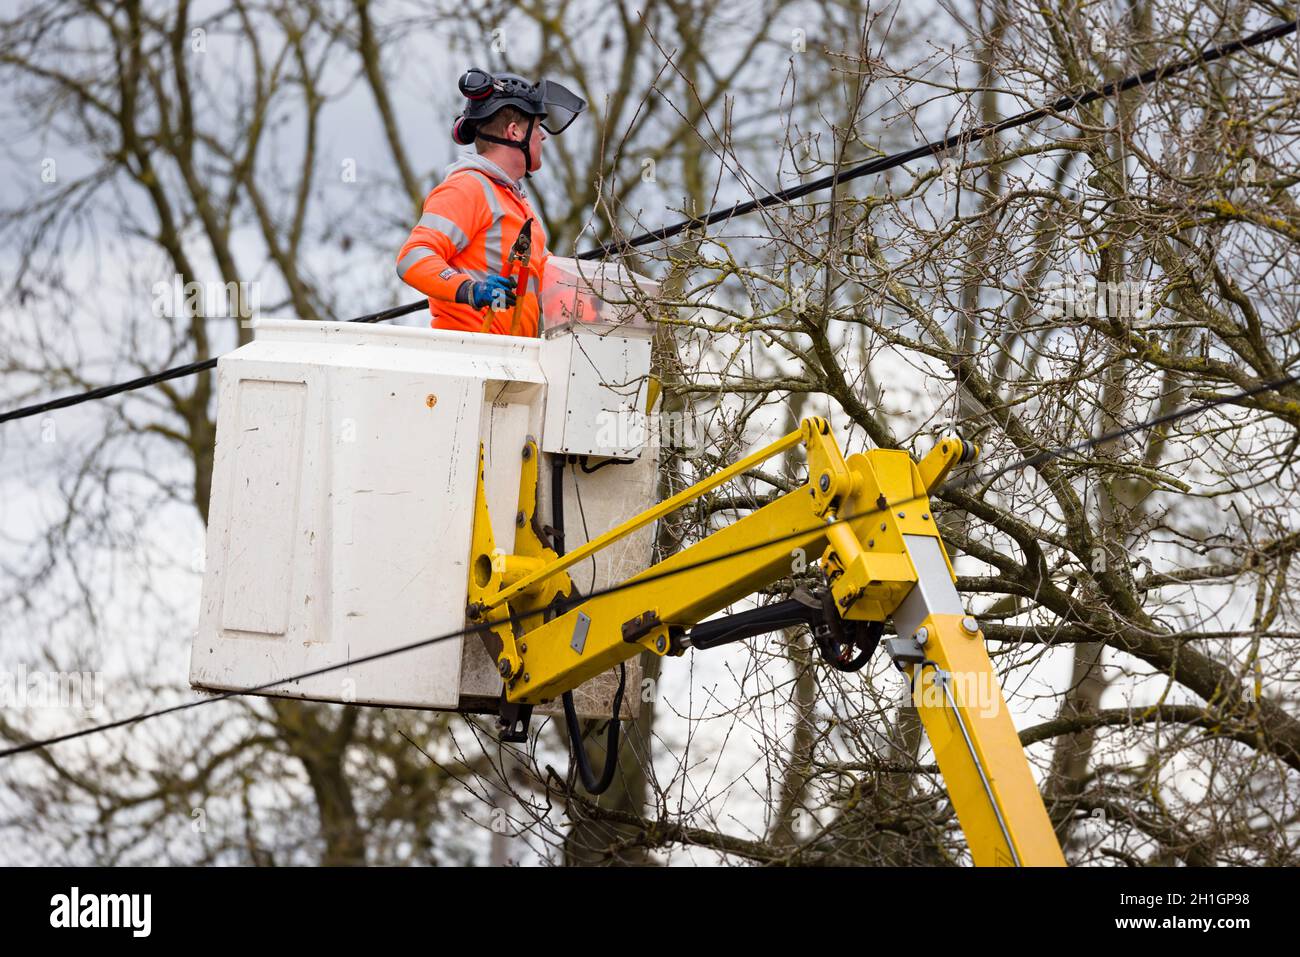 BUCKINGHAM, UK - March 25, 2021. Utility worker in a cherry picker cutting back trees near overhead power lines, UK Stock Photo